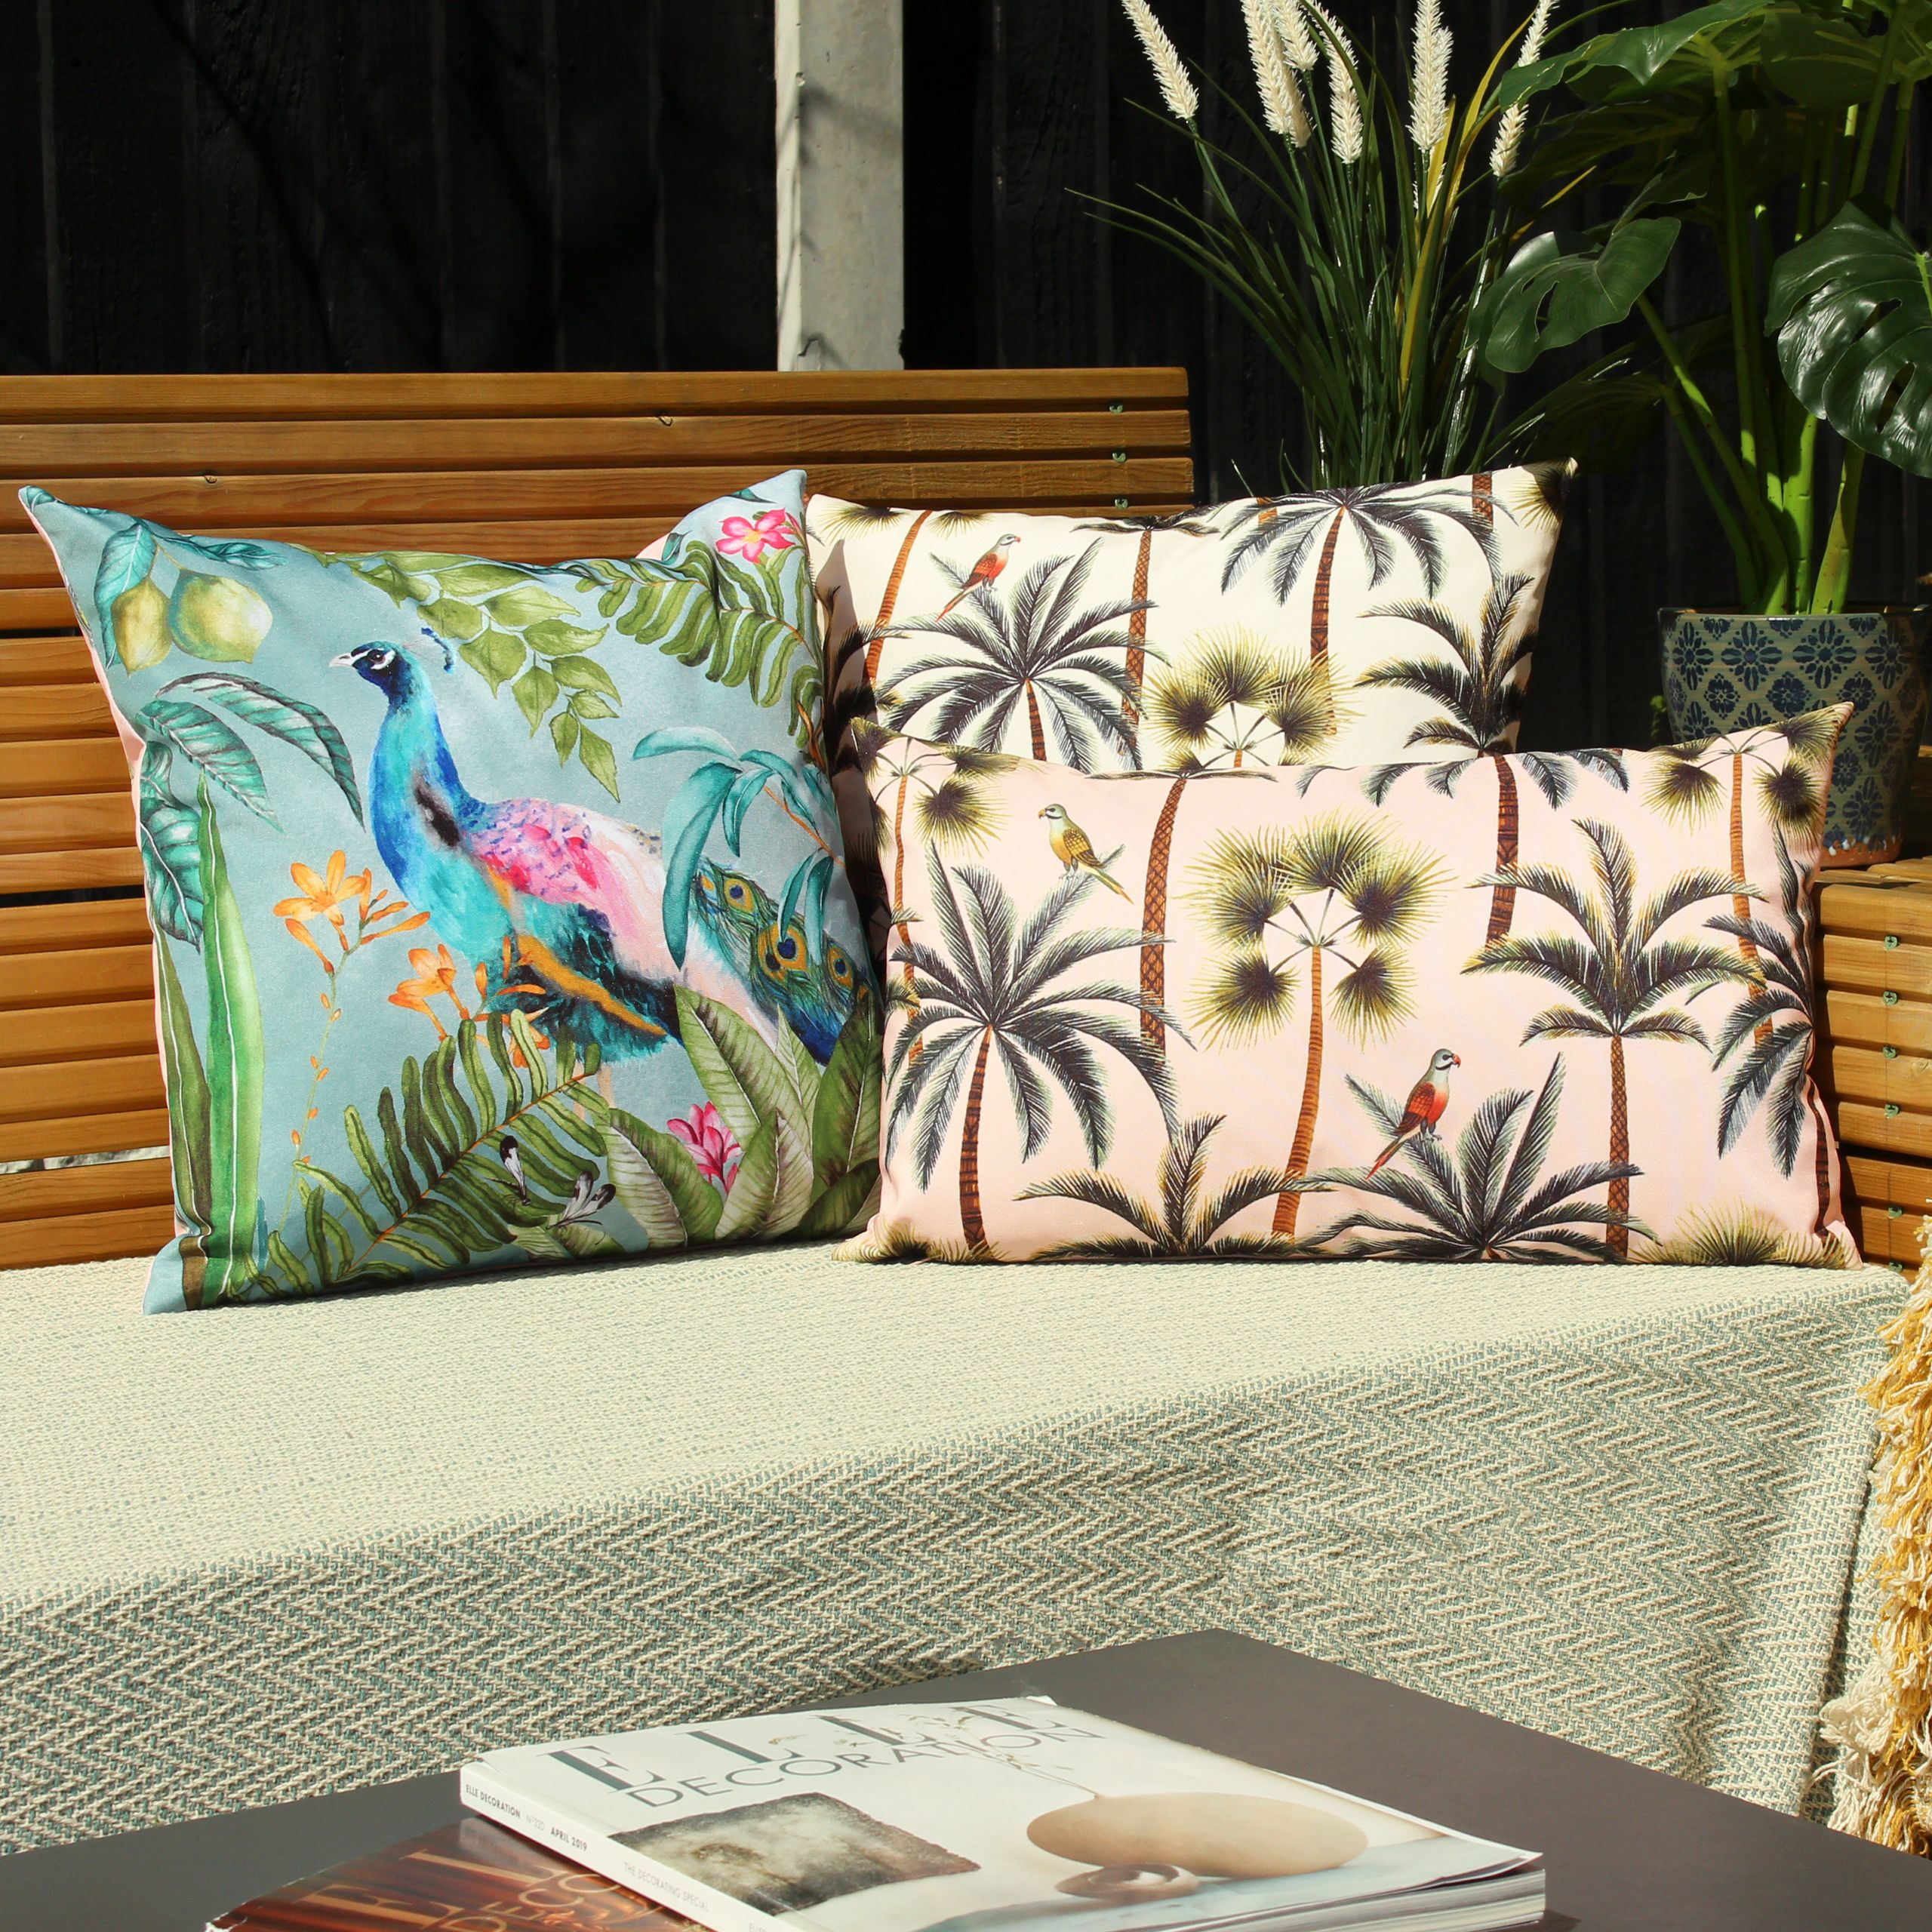 Featuring a beautifully detailed Peacock amongst tropical foliage, on a water resistant polyester, the Peacock cushion is the perfect addition to your outdoor space.